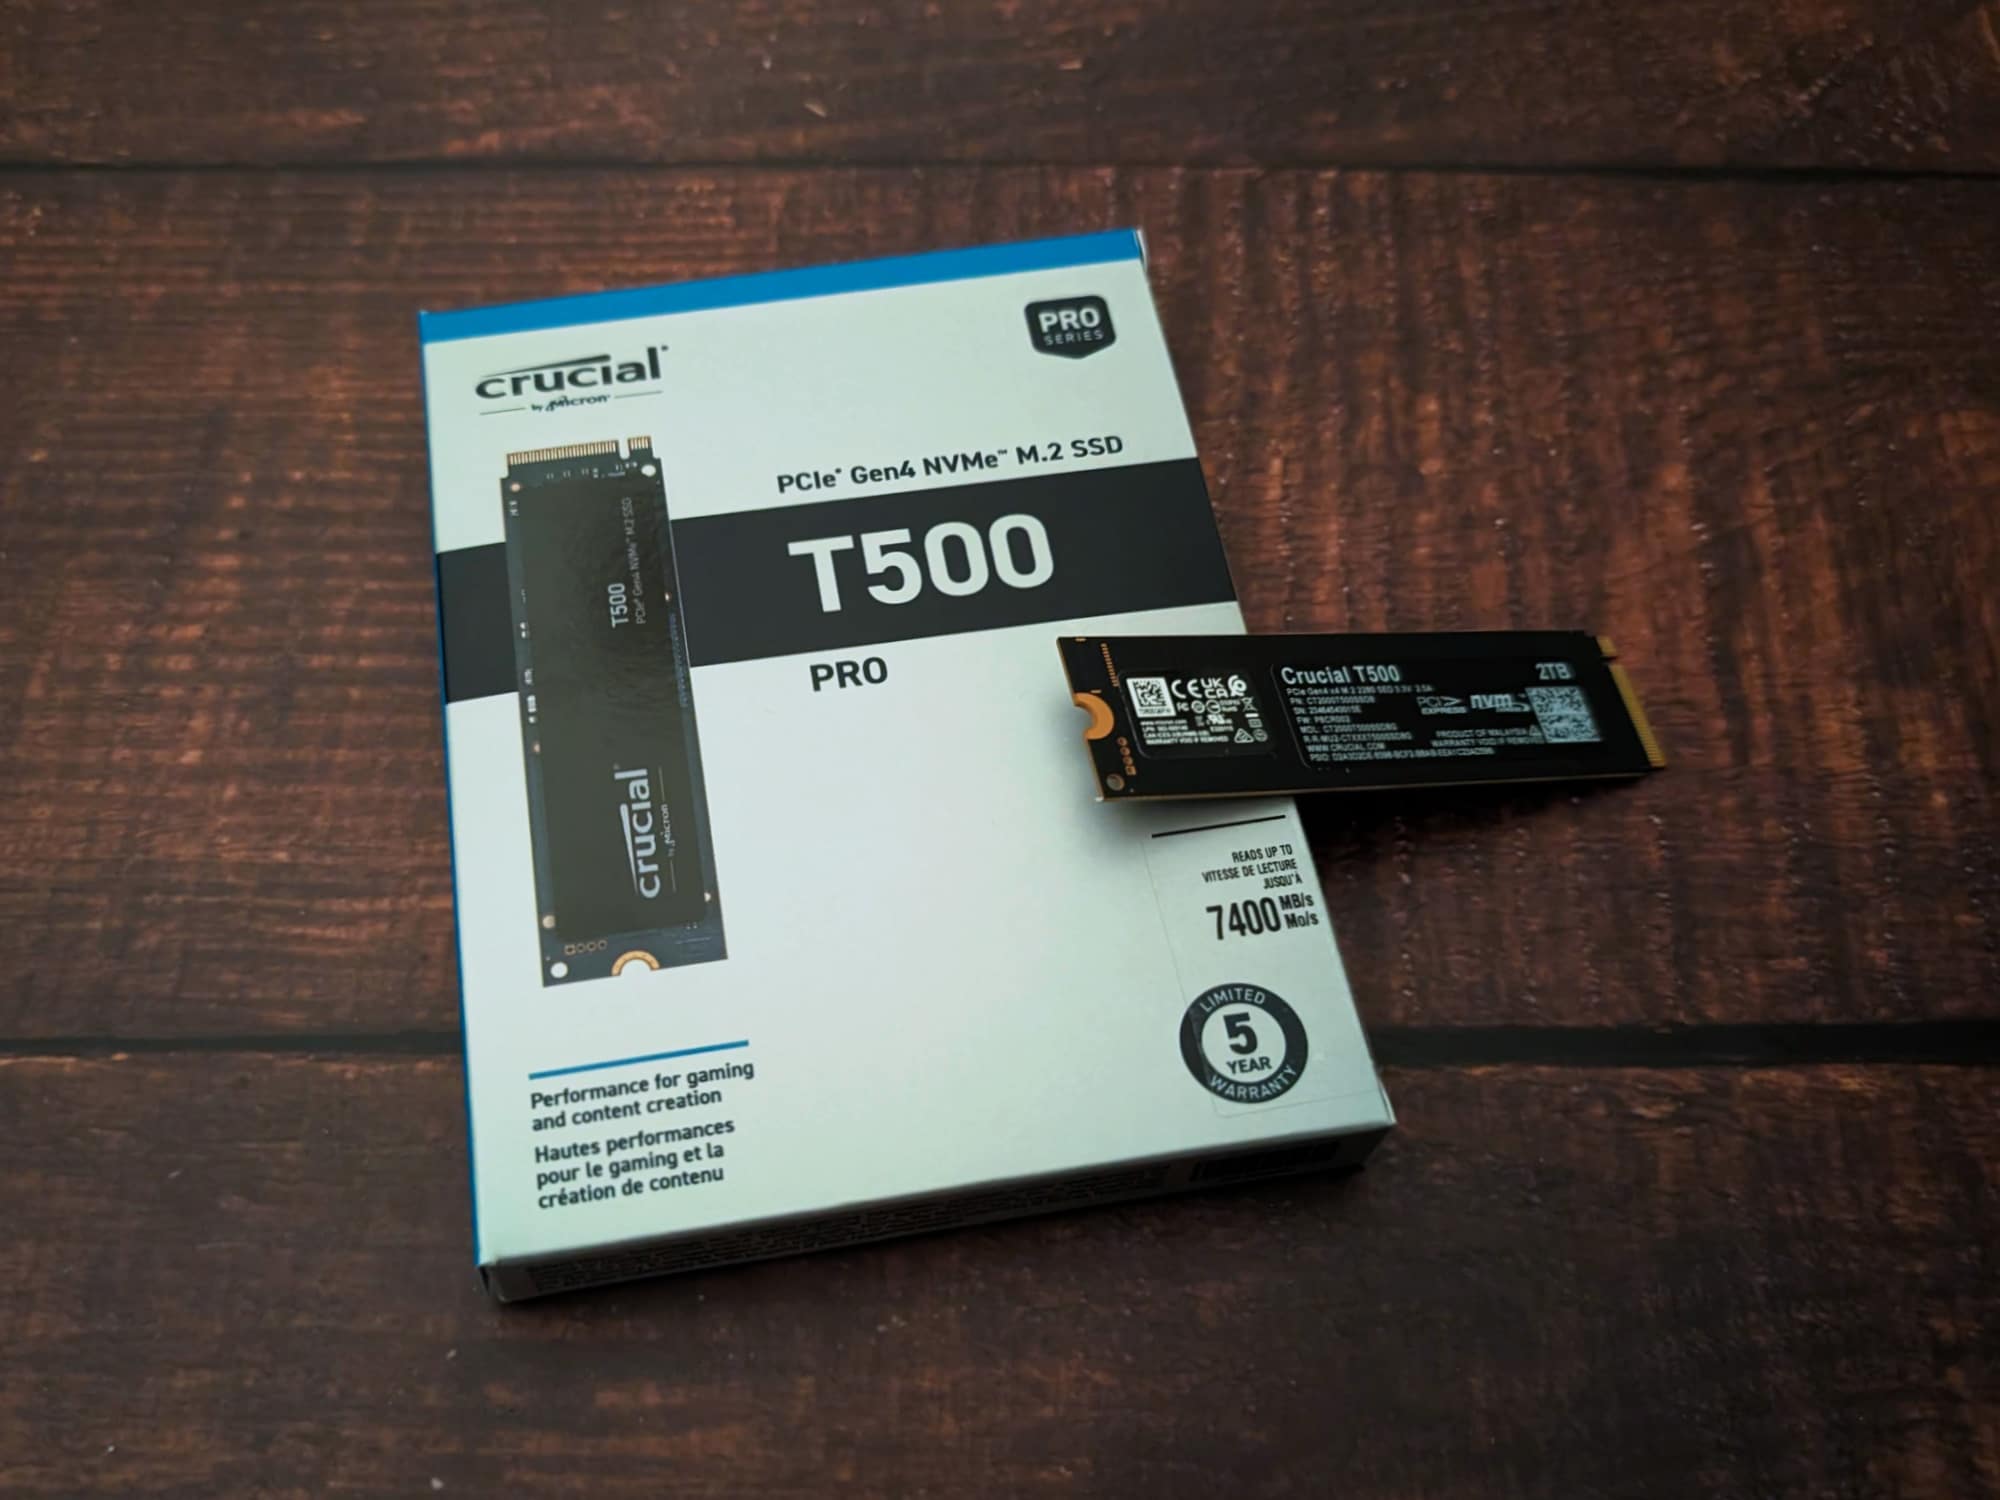 Crucial T500 test - Crucial's new premium SSD with PCIe 4.0